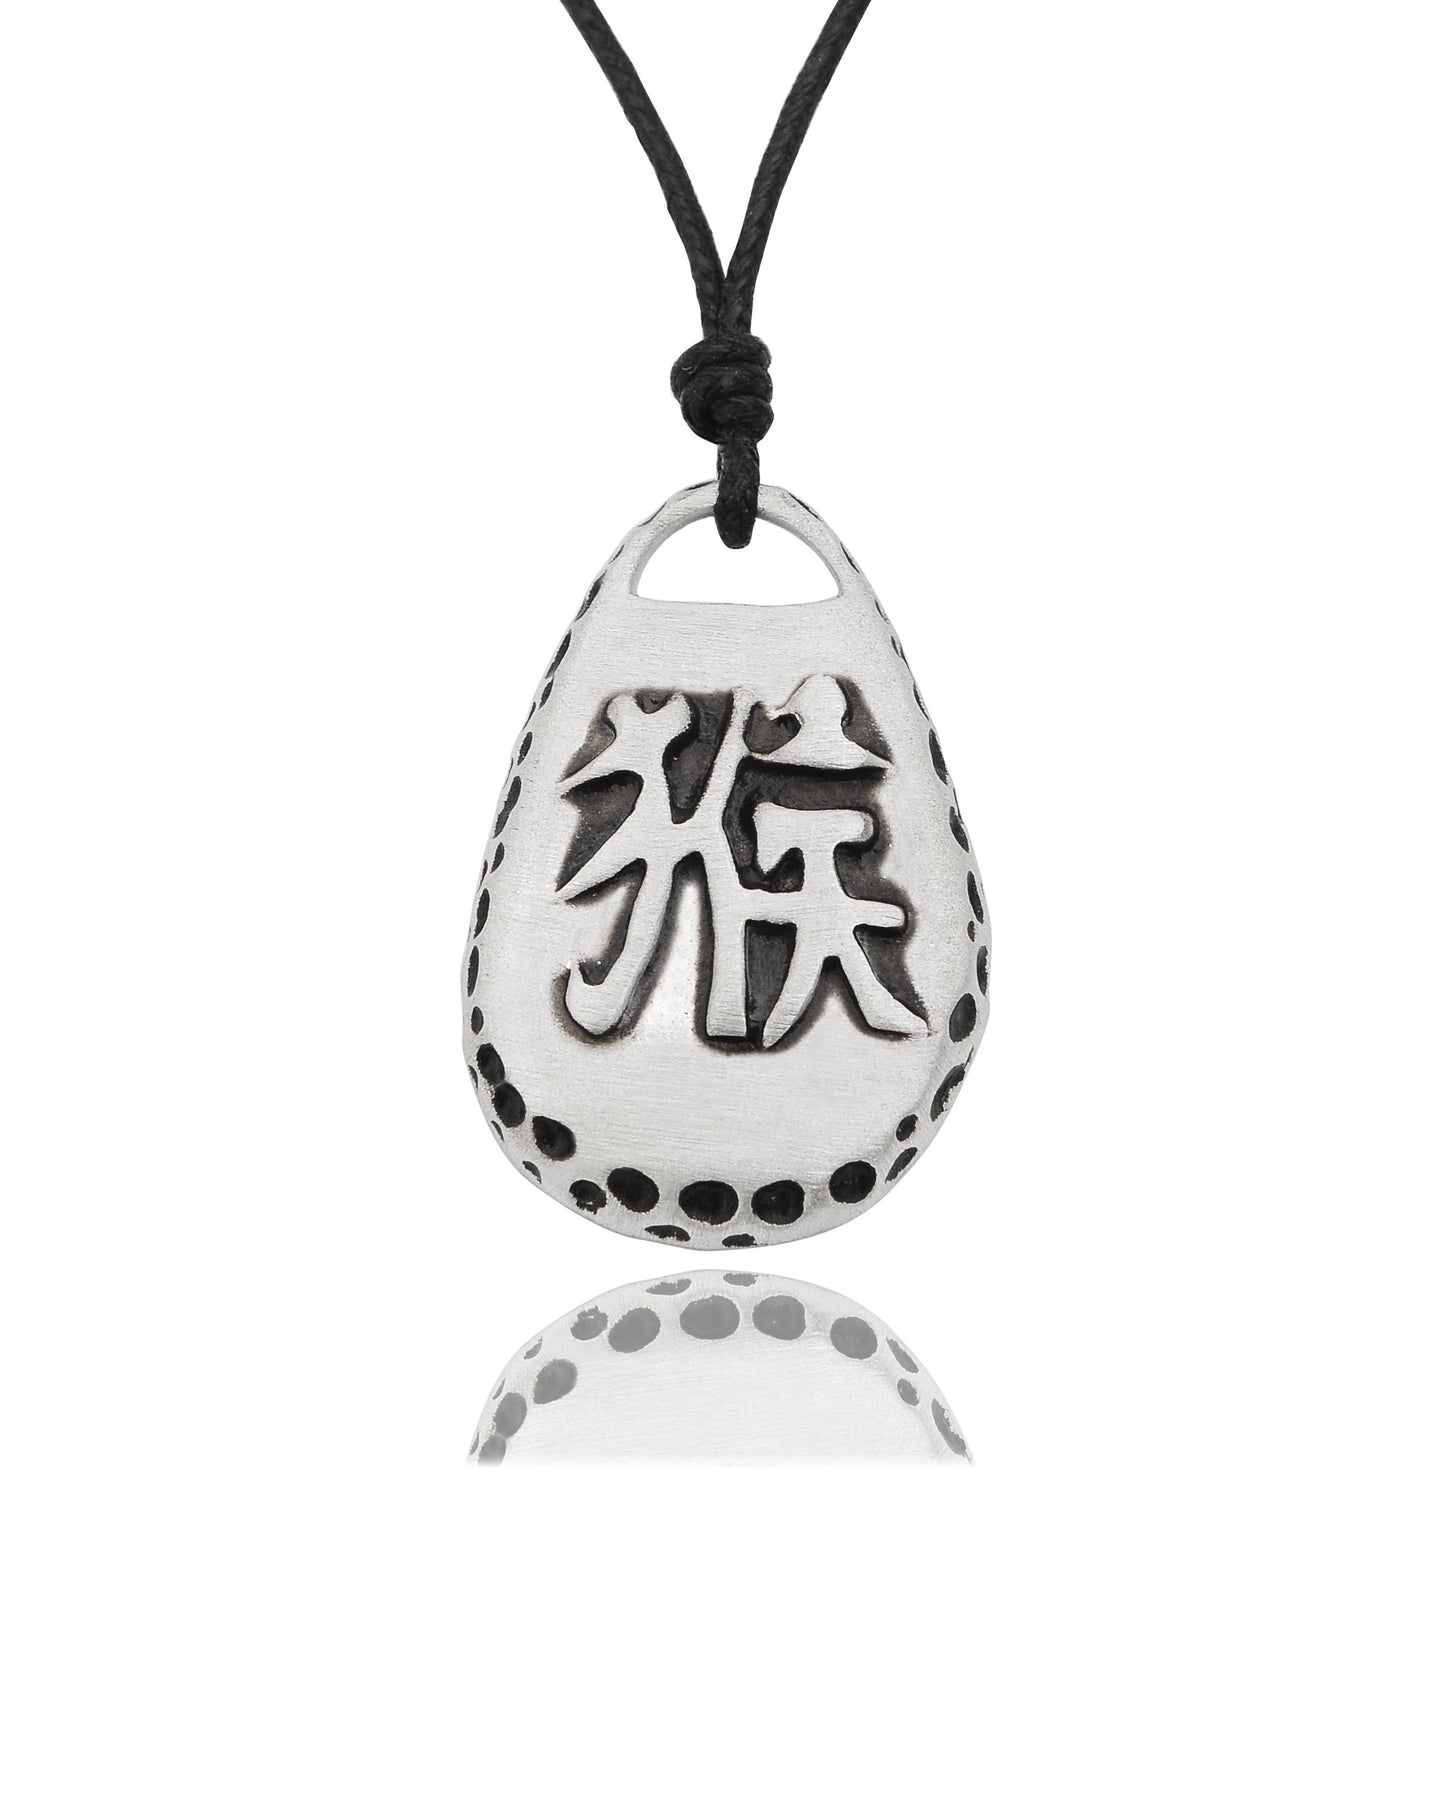 Chinese Zodiac Silver Pewter Charm Necklace Pendant Jewelry